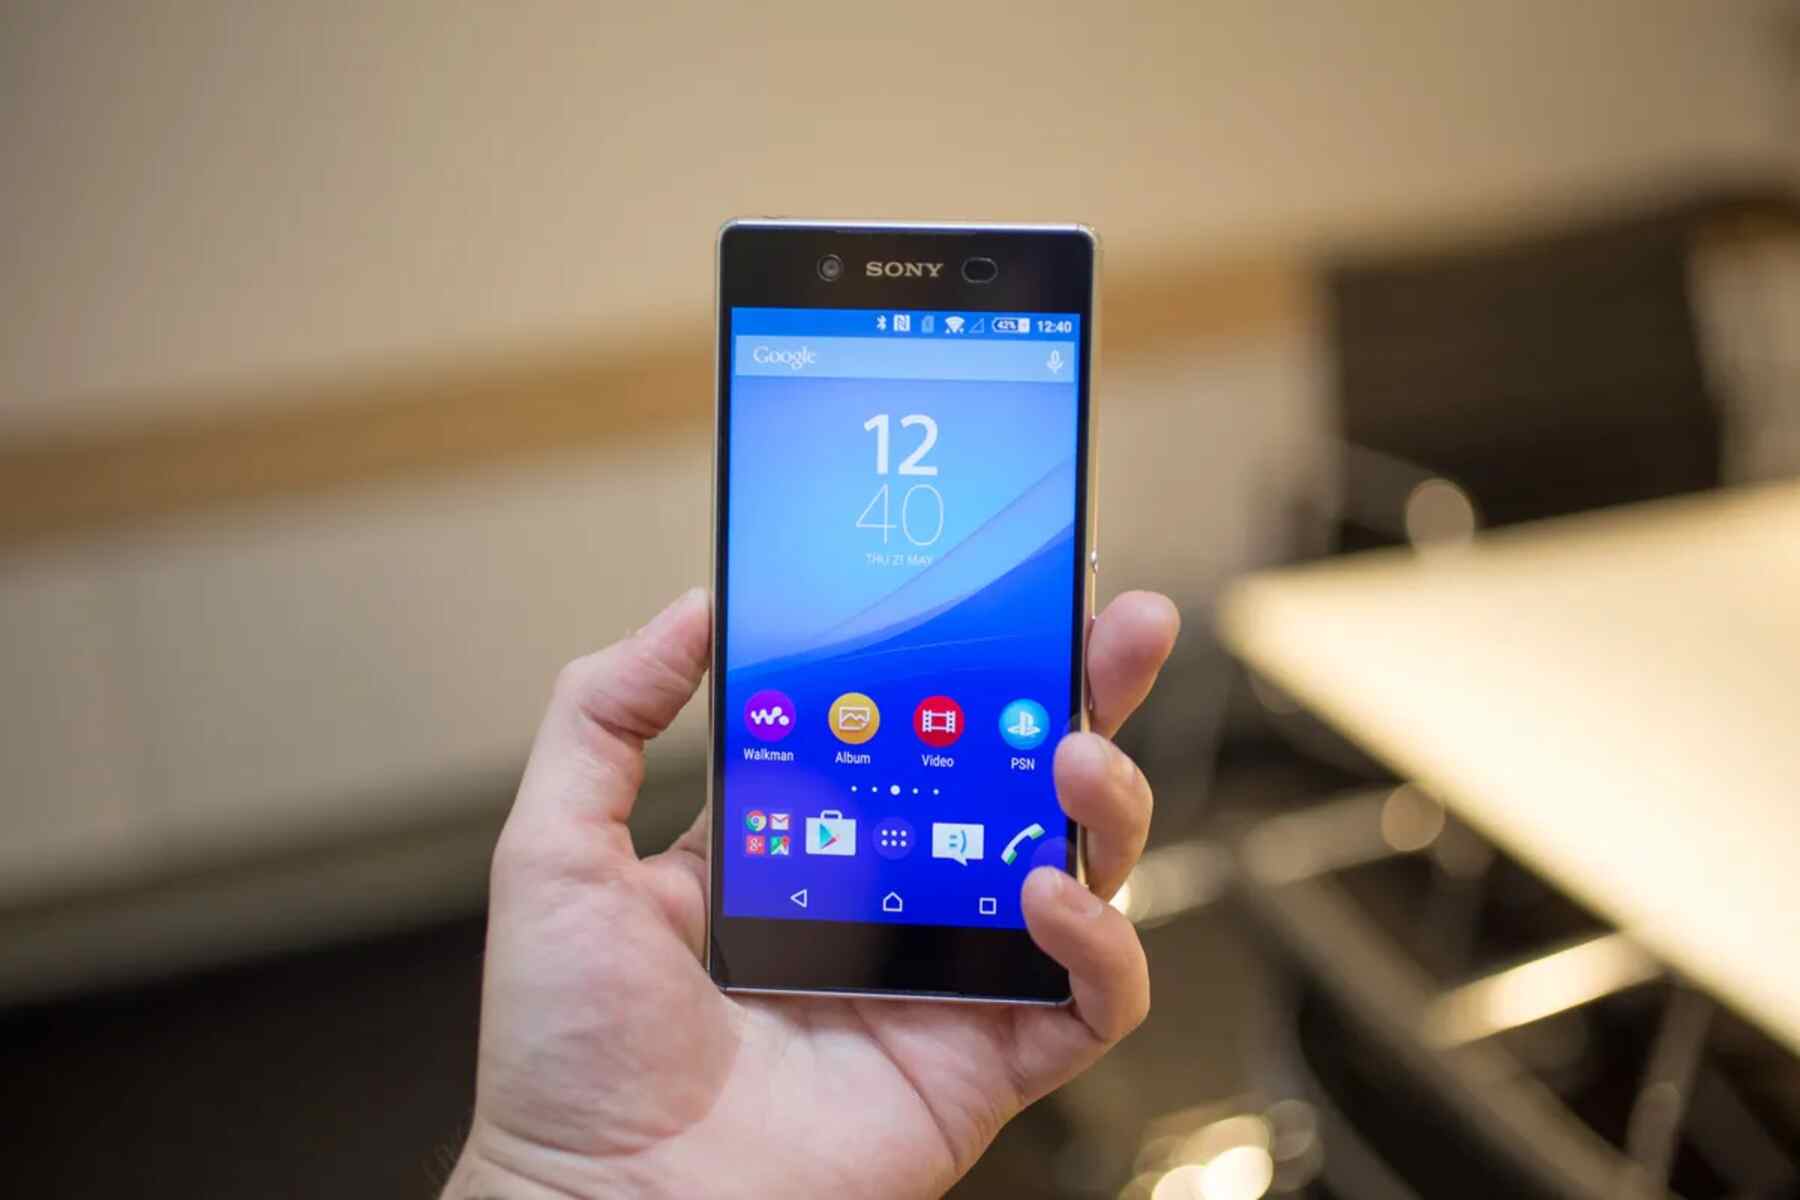 power-button-alternatives-turning-on-xperia-z3-without-button